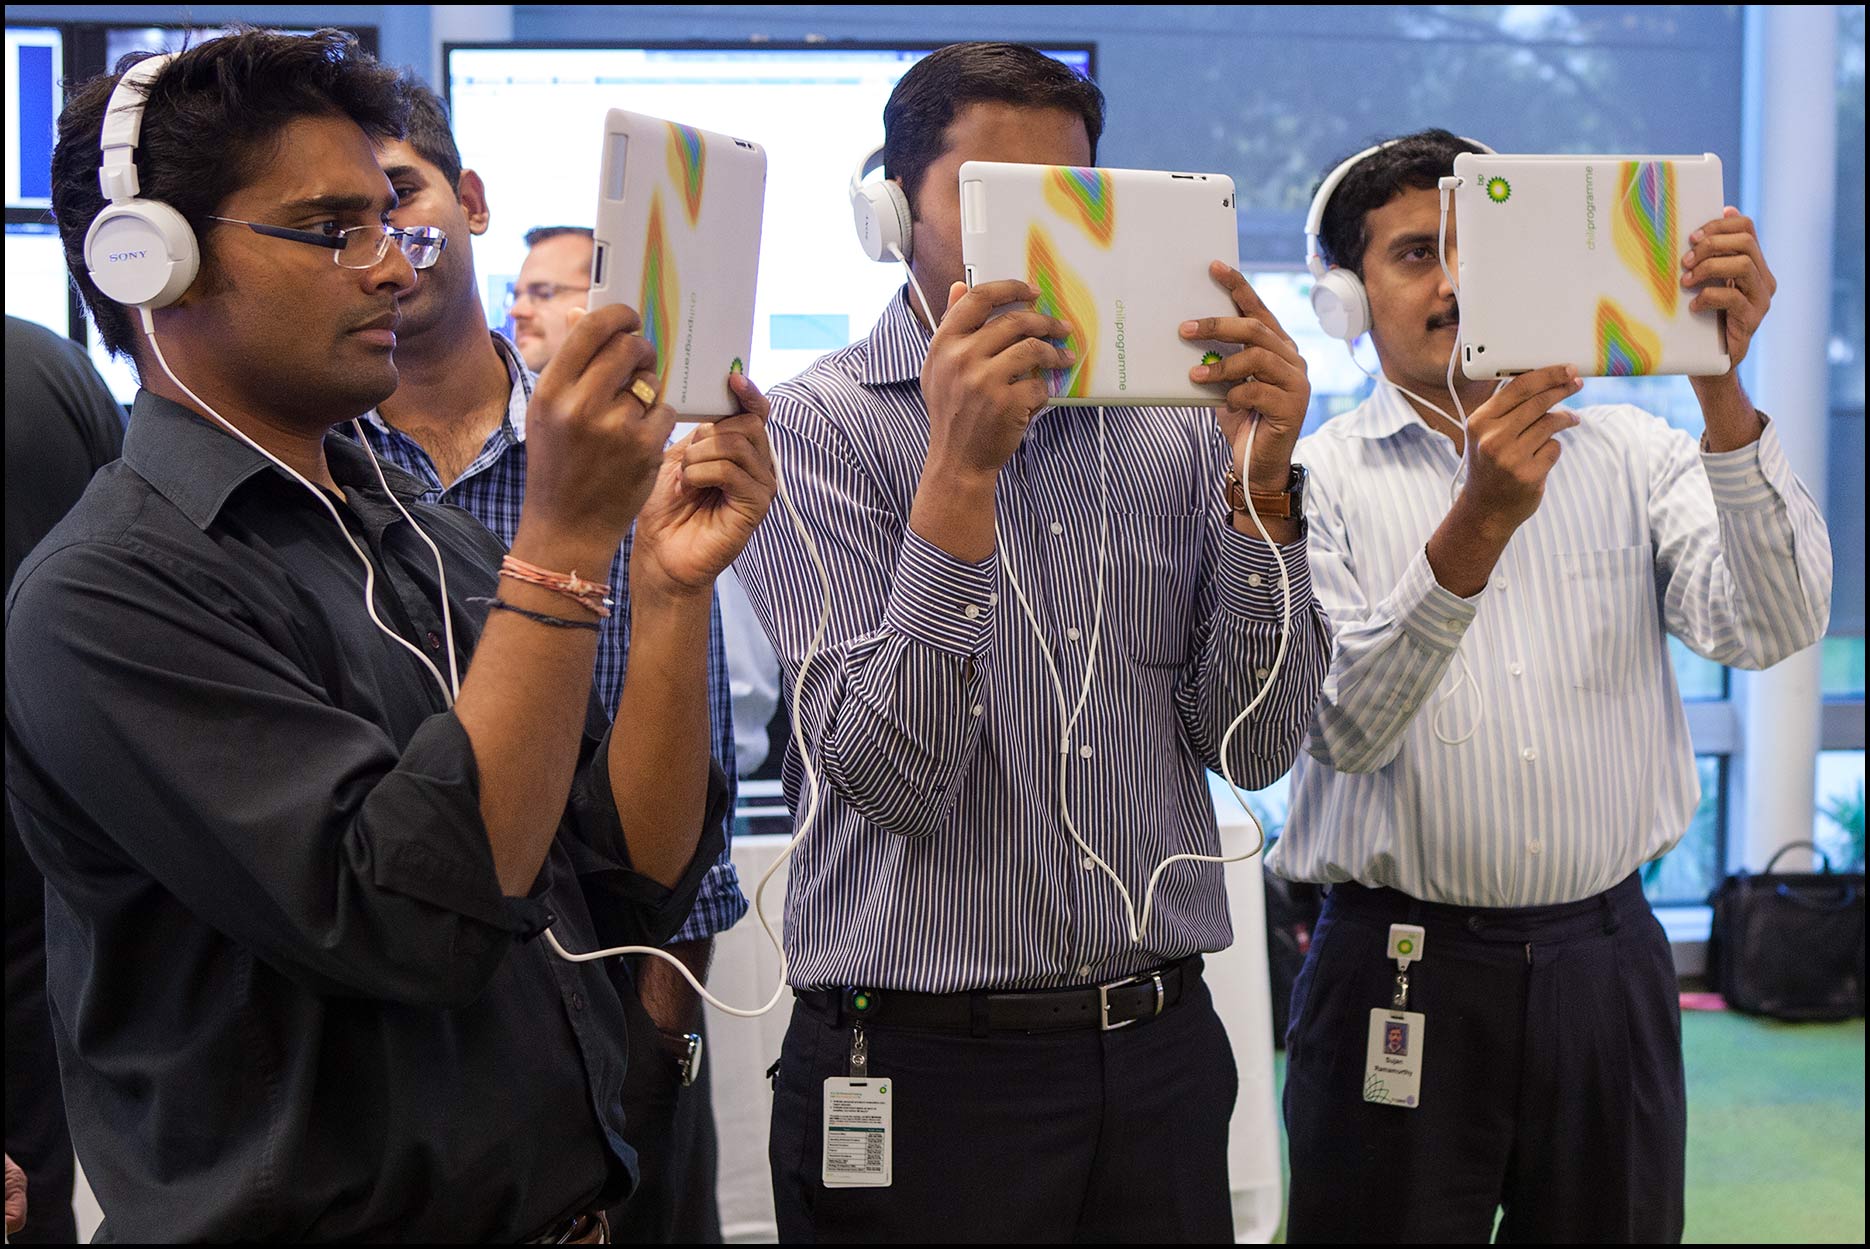 Employees hold up iPad tablets and wear headphones during a virtual reality demonstration at their company.